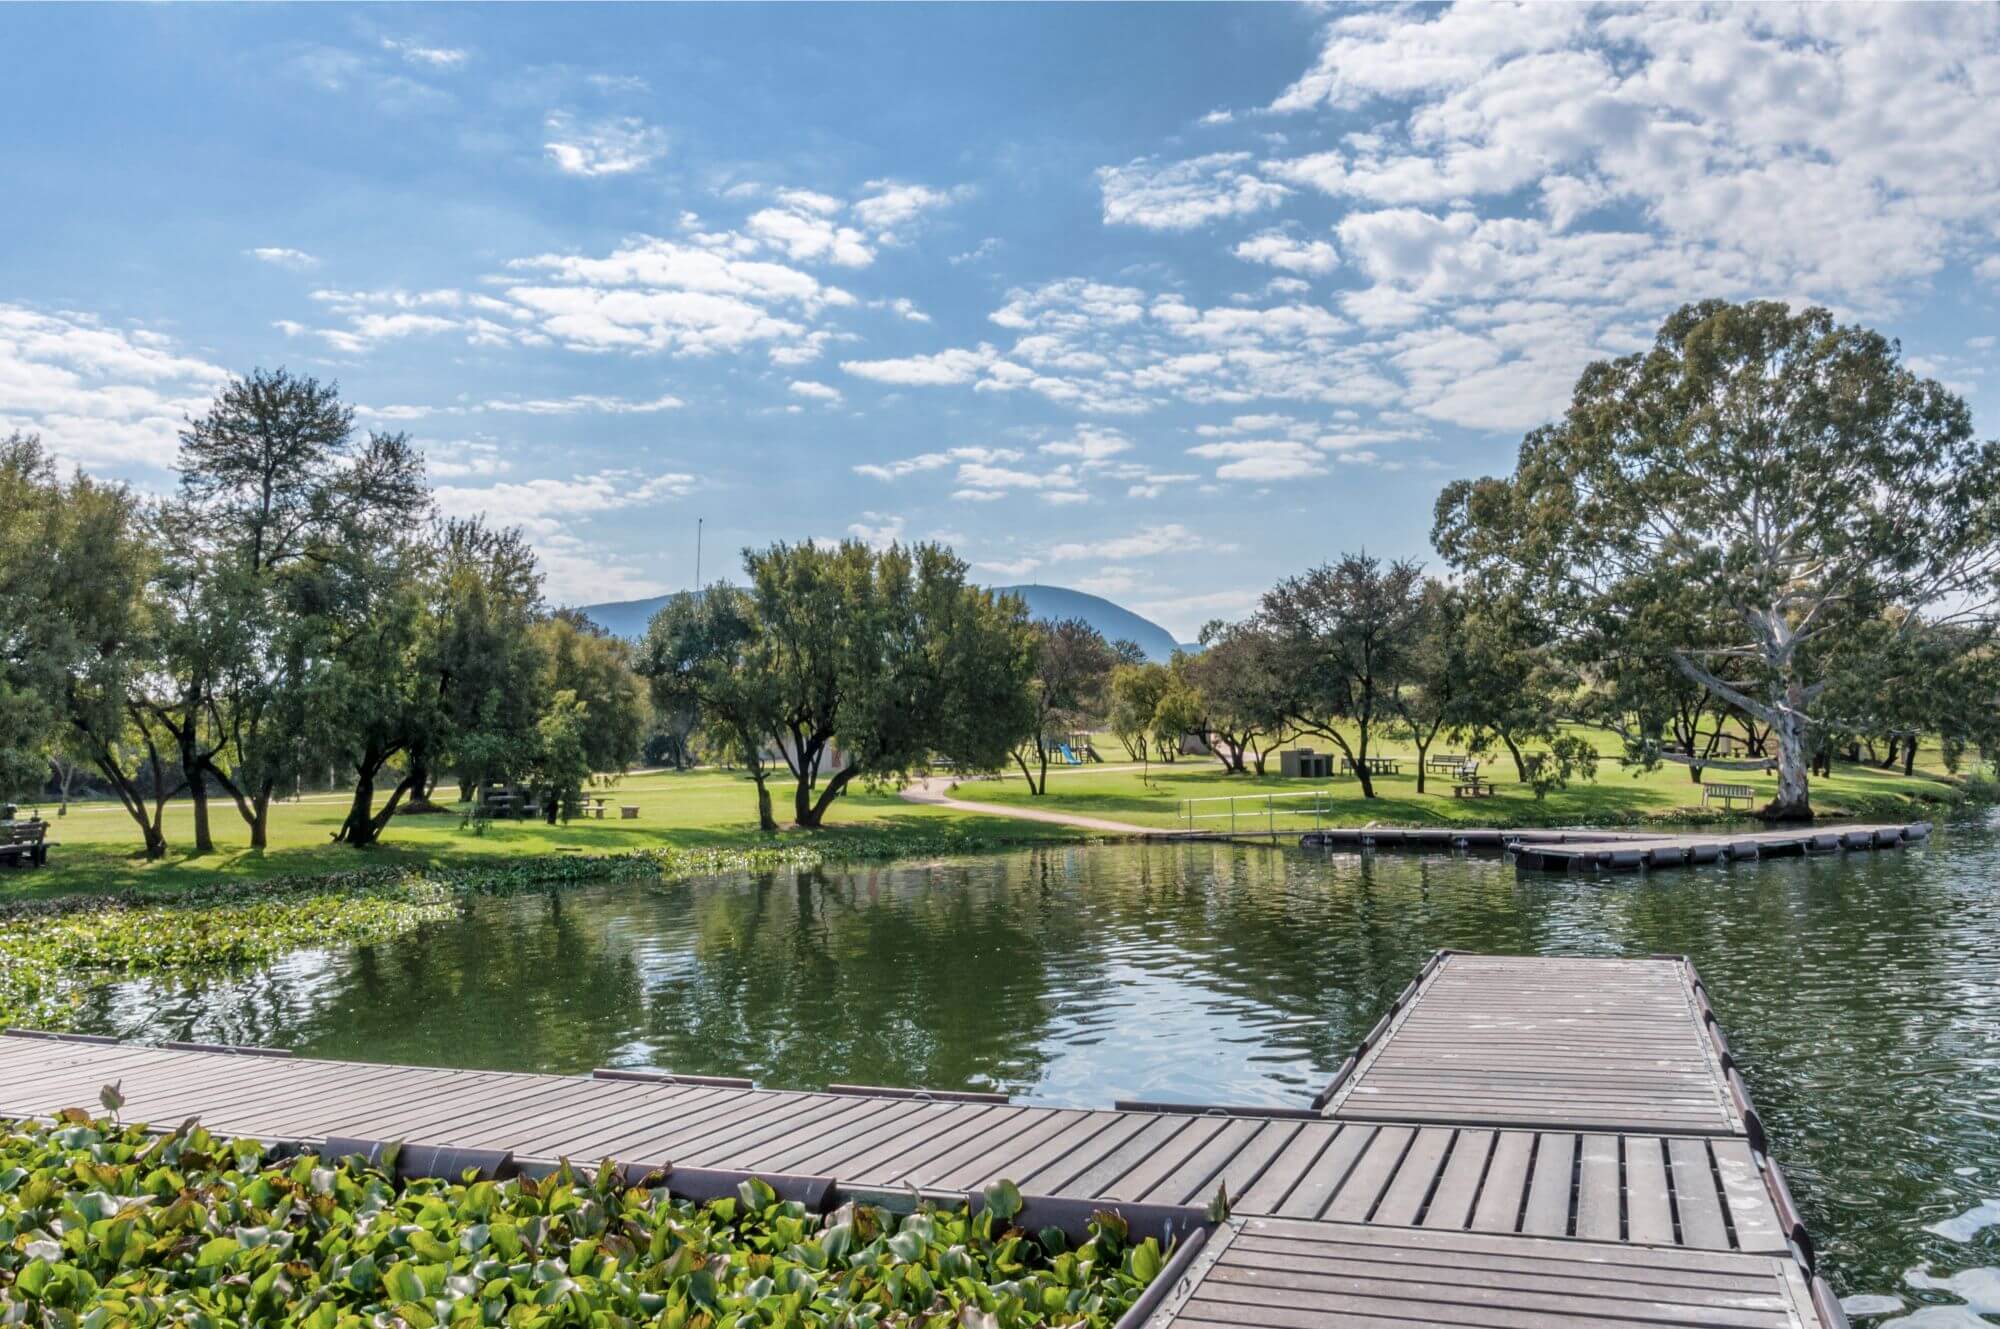 Hartbeespoort, in the heart of the Cradle of Humankind north of Pretoria, has been steadily shifting its profile over the last few years – from primarily a holiday/weekend destination to a primary residence village in the countryside.